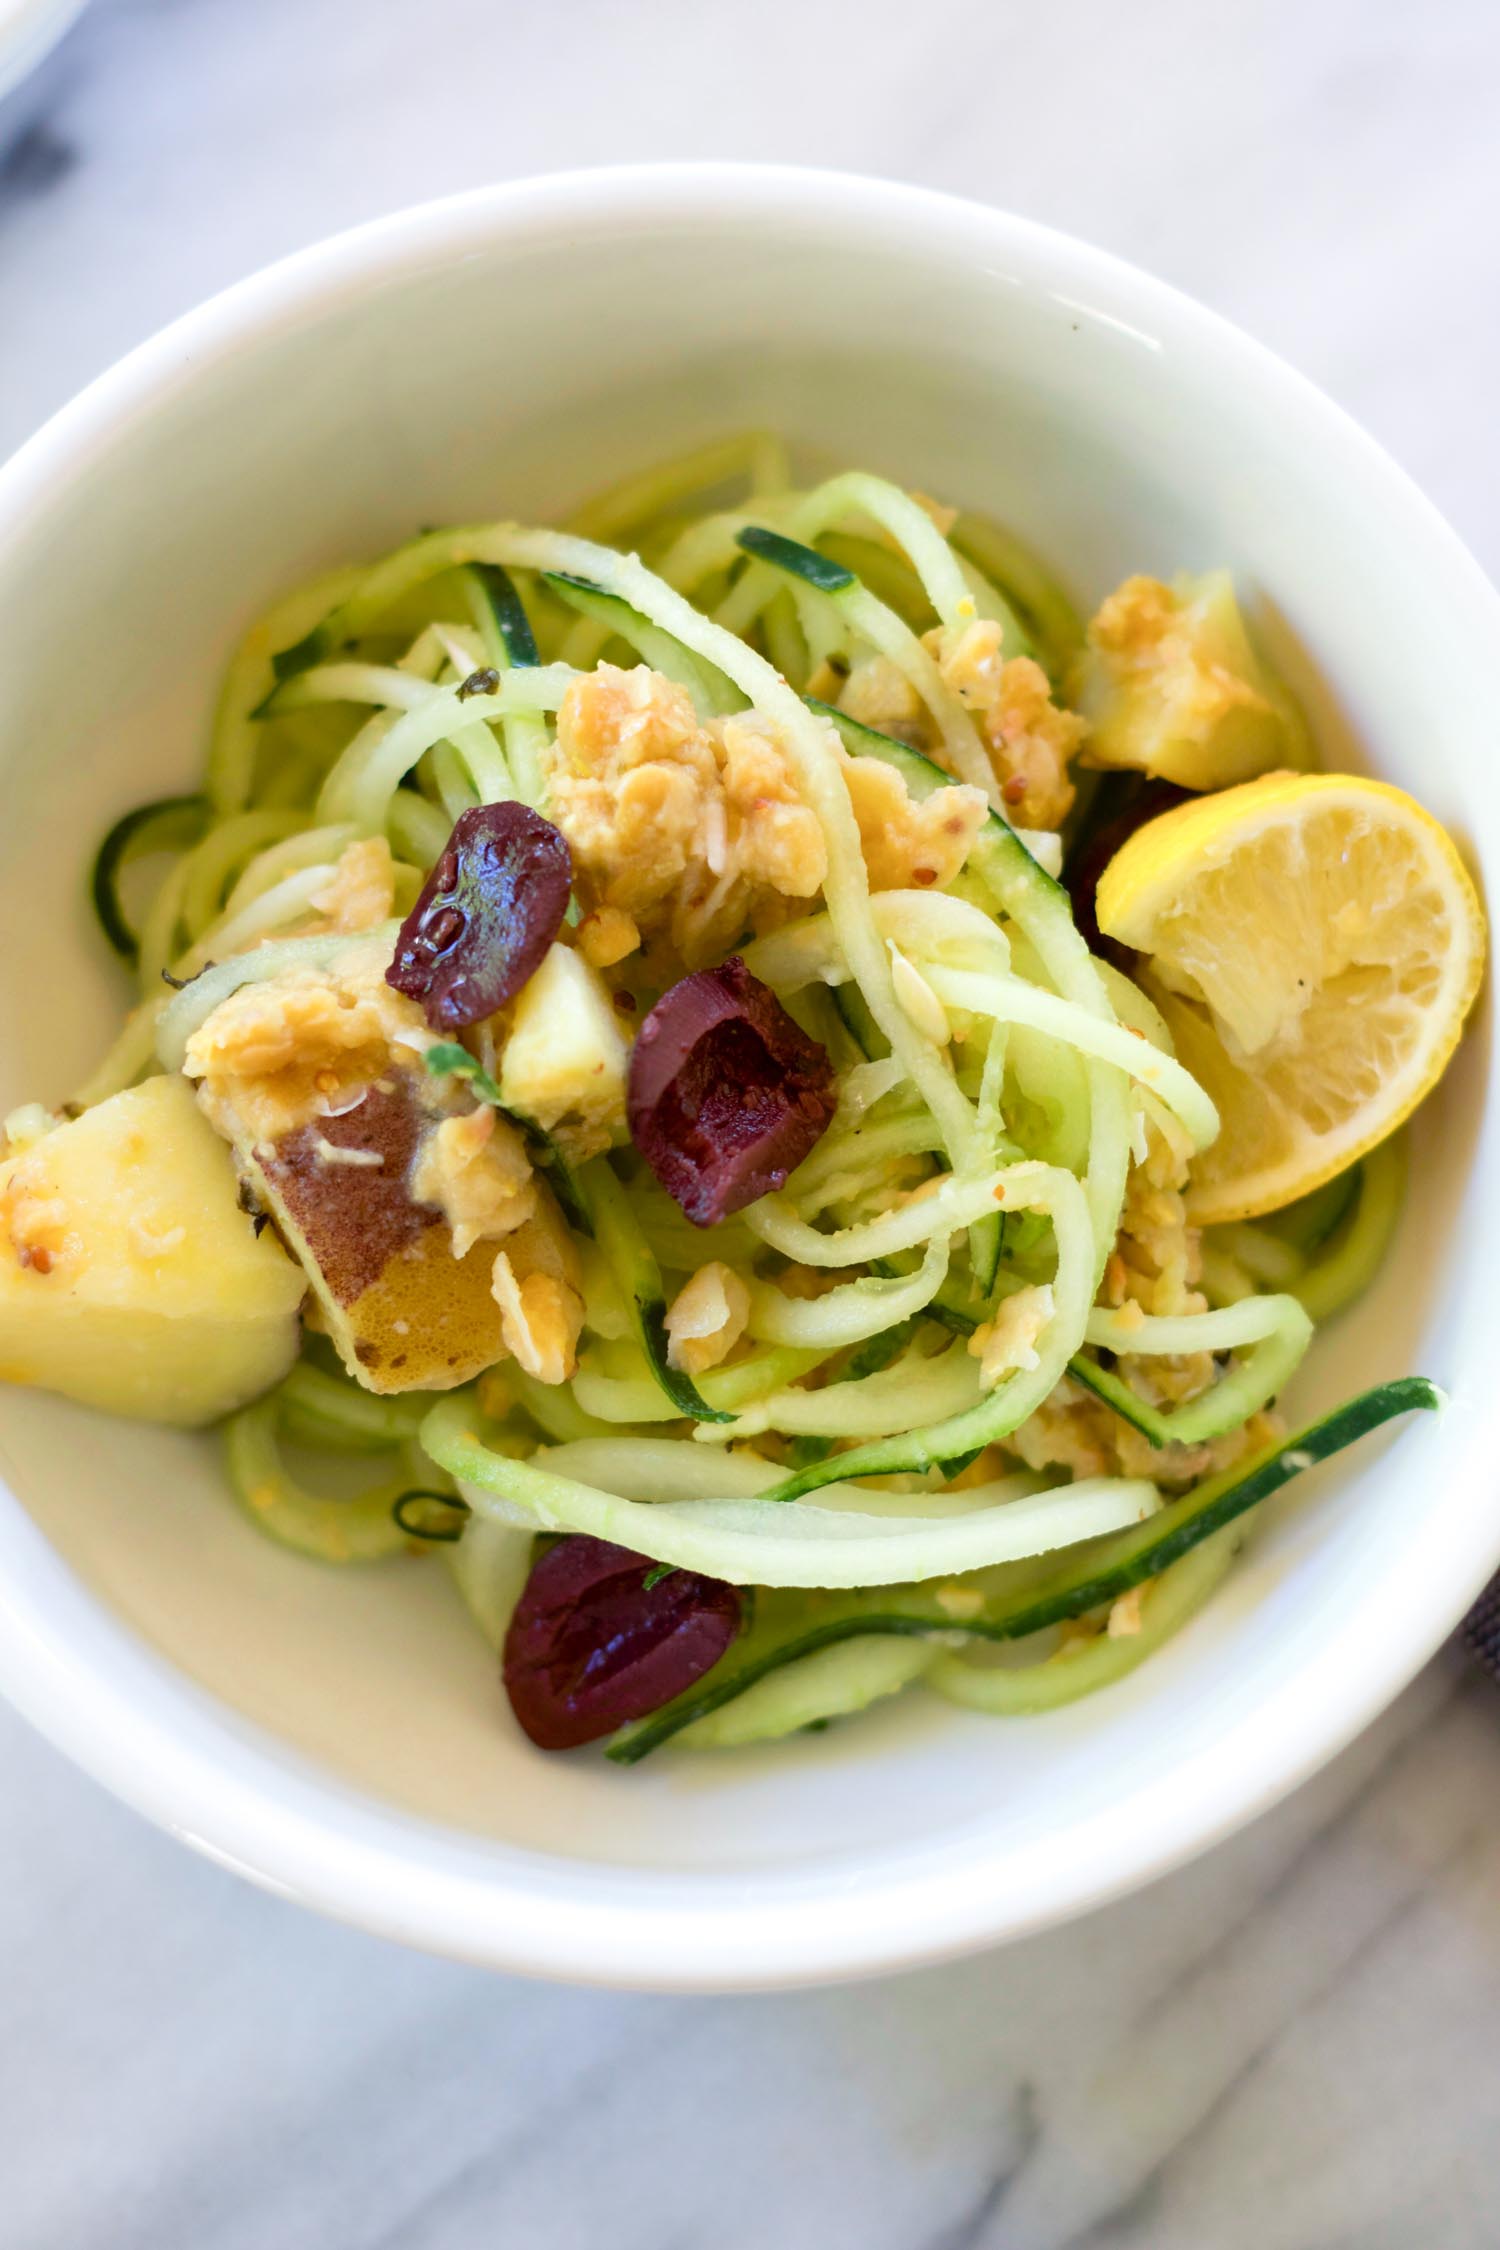 Nicoise-inspired salad with Spiralized Cucumber Noodles, by Beautiful Ingredient